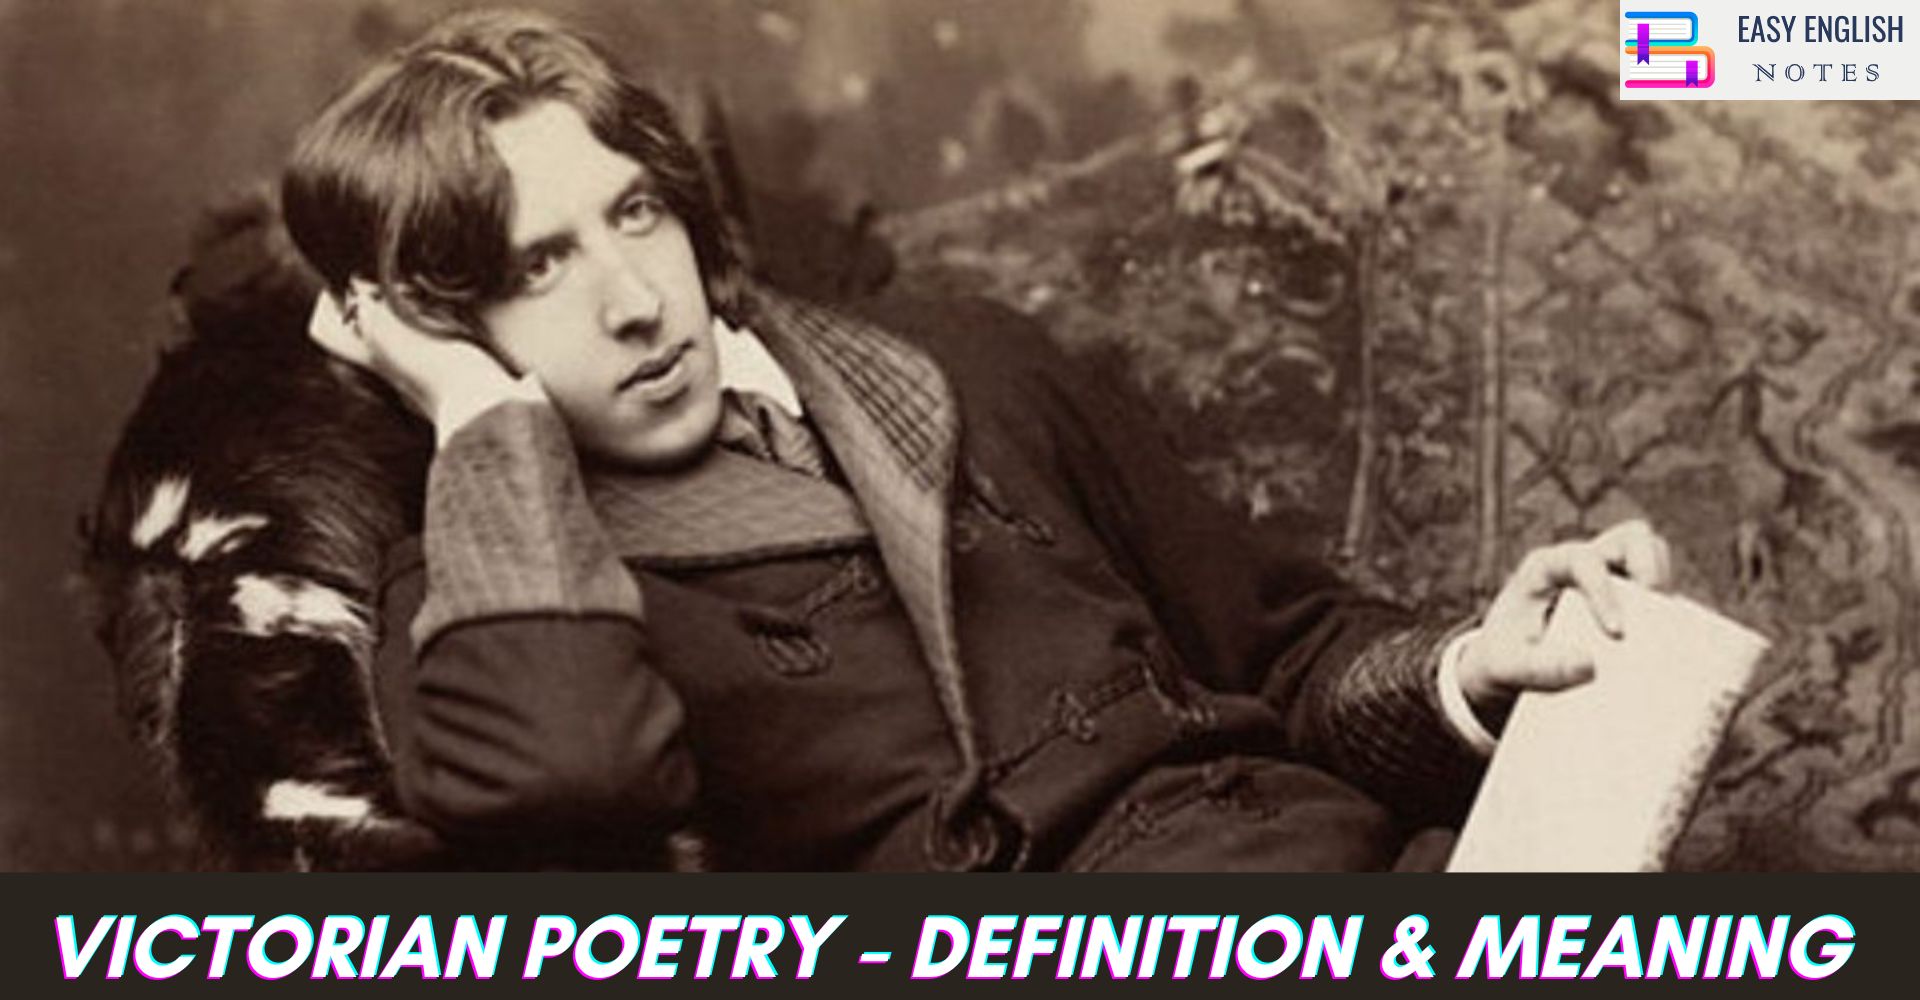 Victorian Poetry - Definition & Meaning